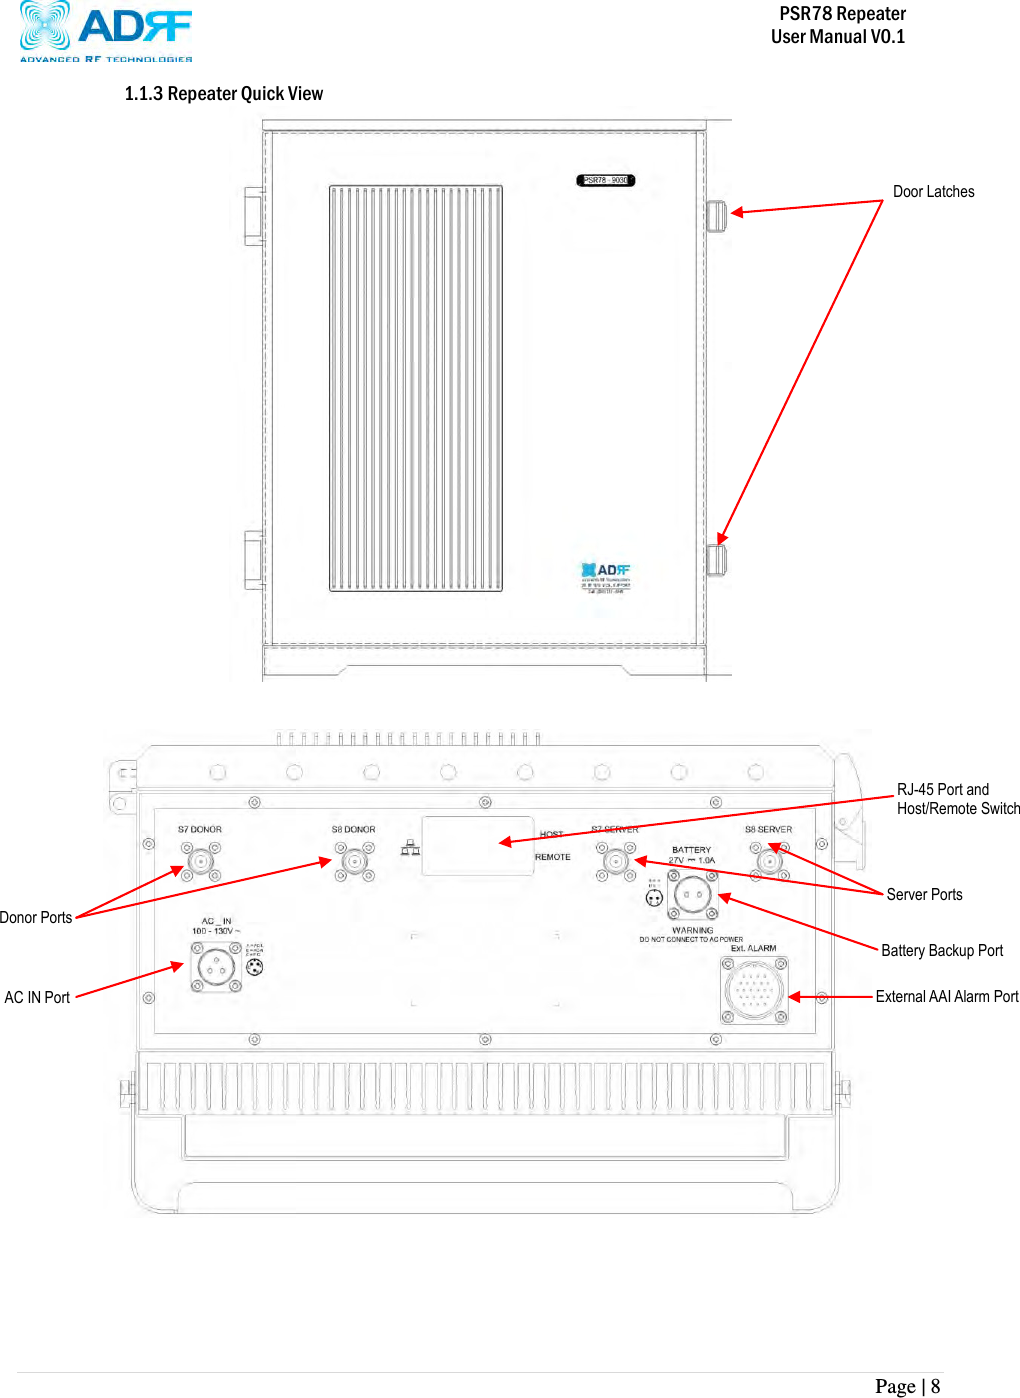           PSR78 Repeater     User Manual V0.1 Page | 8    1.1.3 Repeater Quick View       Door Latches AC IN Port External AAI Alarm Port Battery Backup Port  RJ-45 Port and Host/Remote Switch Server Ports Donor Ports  